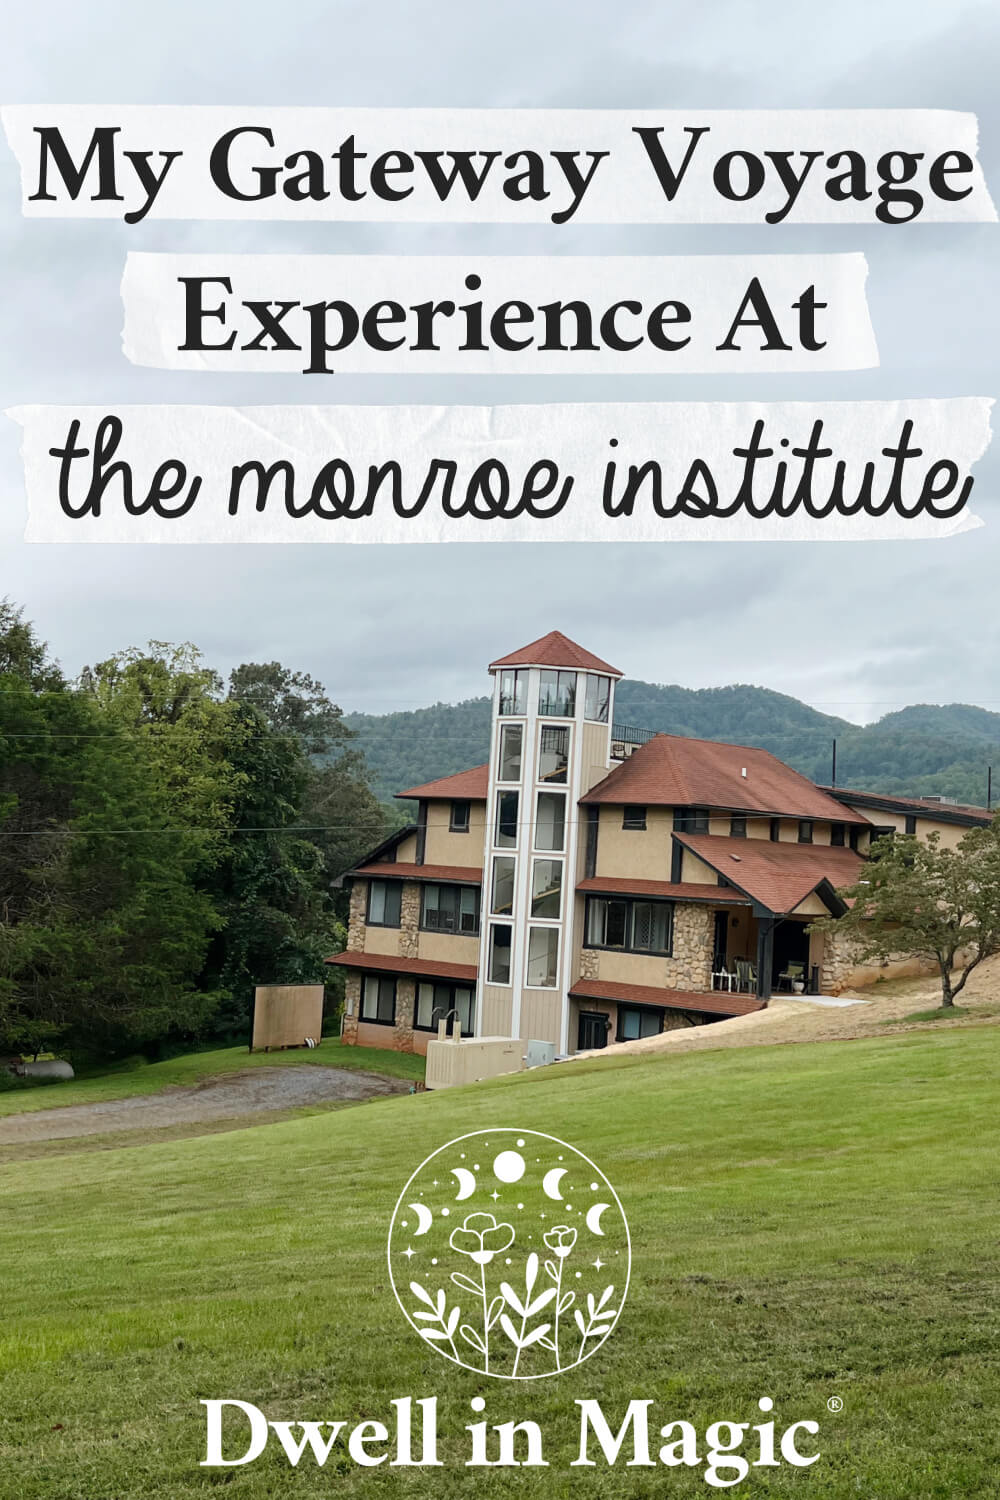 My review from taking the Gateway Voyage experience at The Monroe Institute